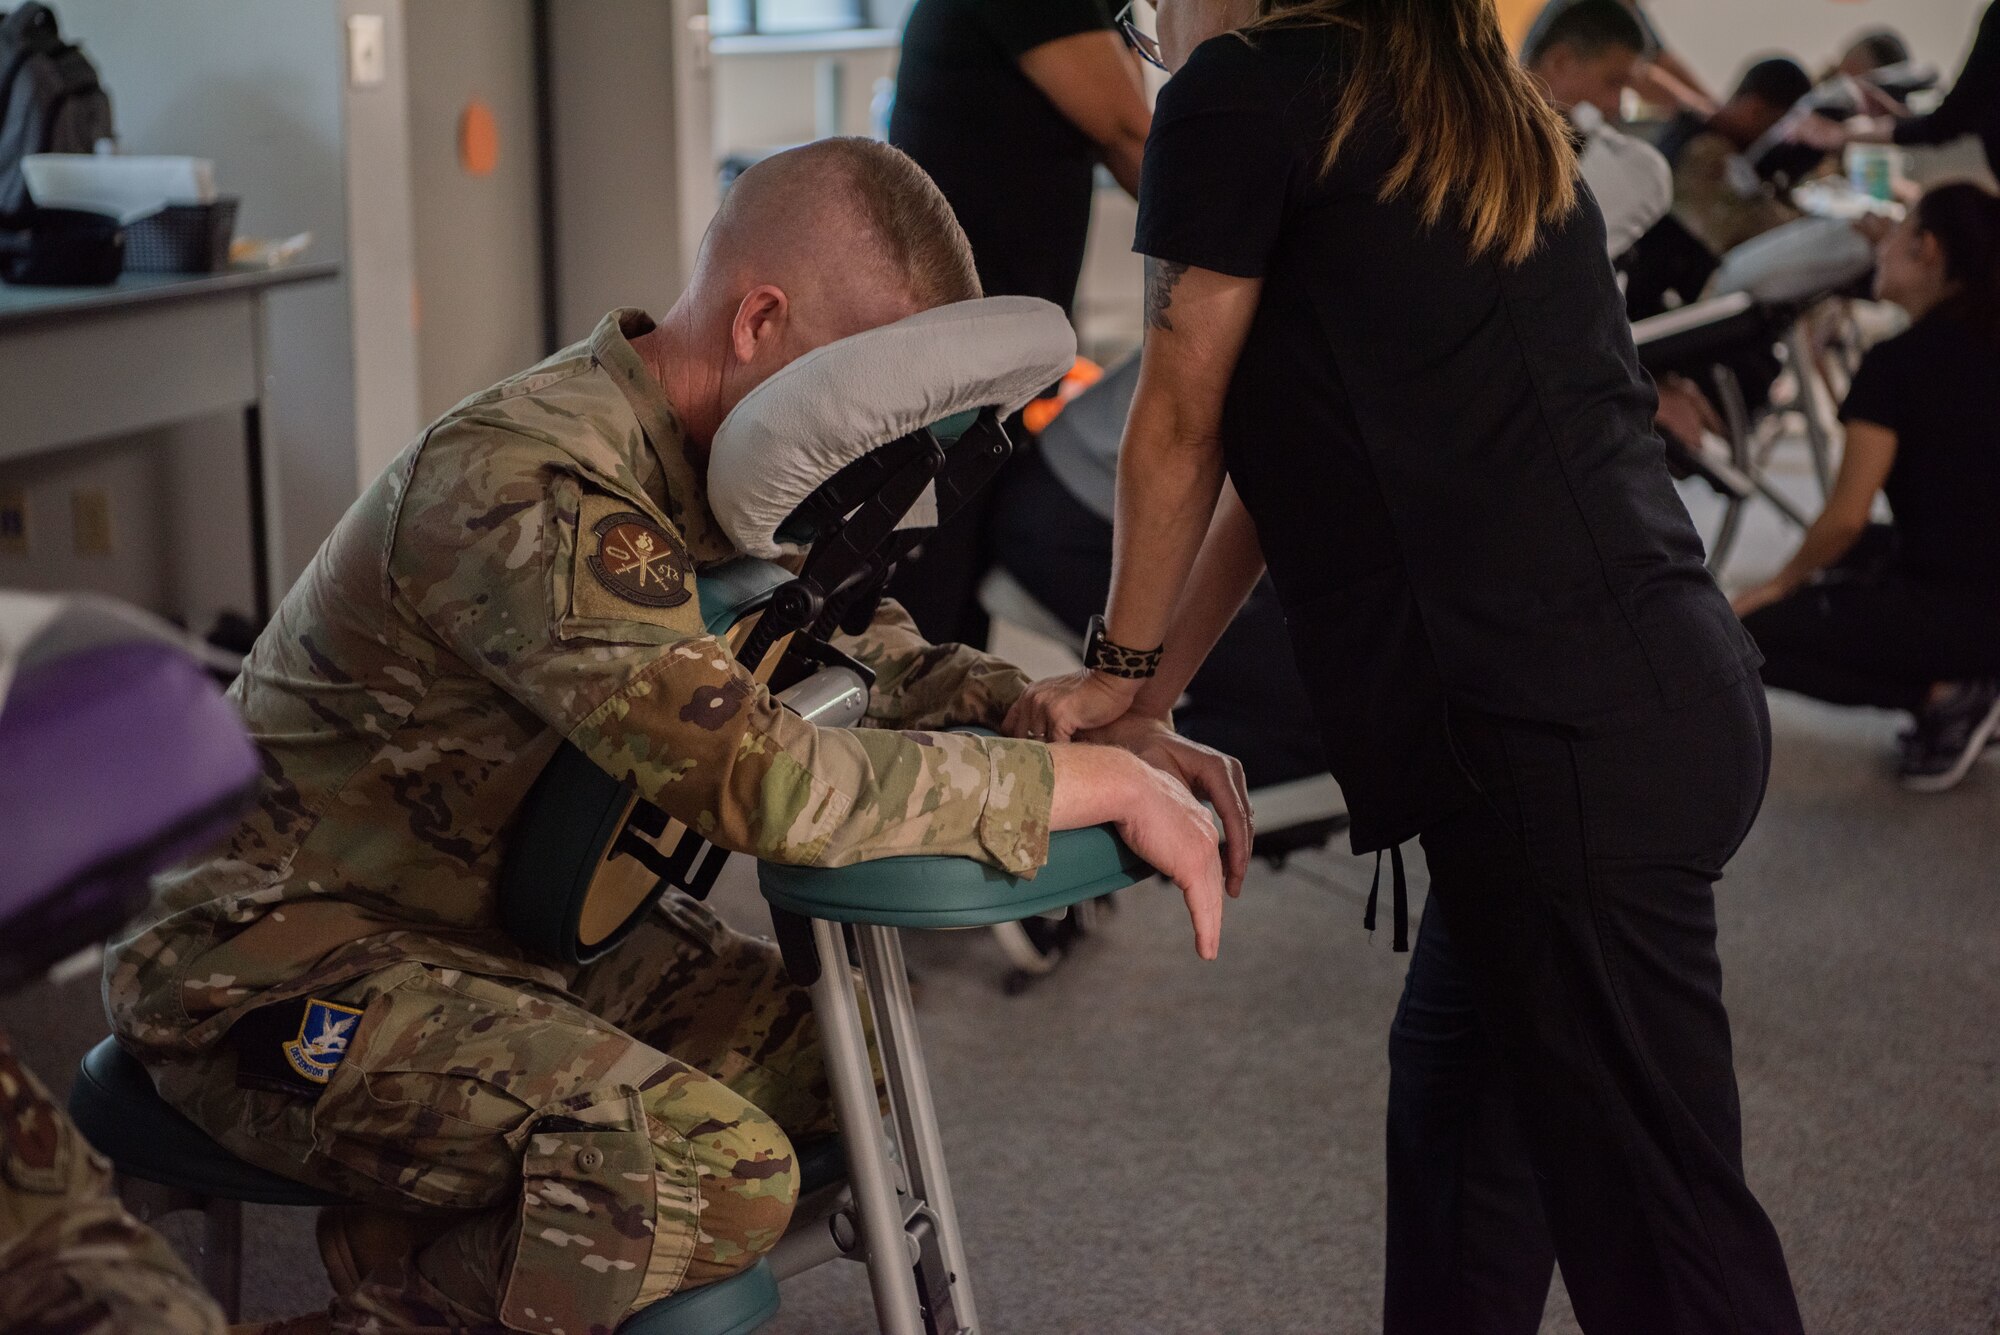 Man in military uniform is sitting down on a massage chair while a massage therapist is massaging him